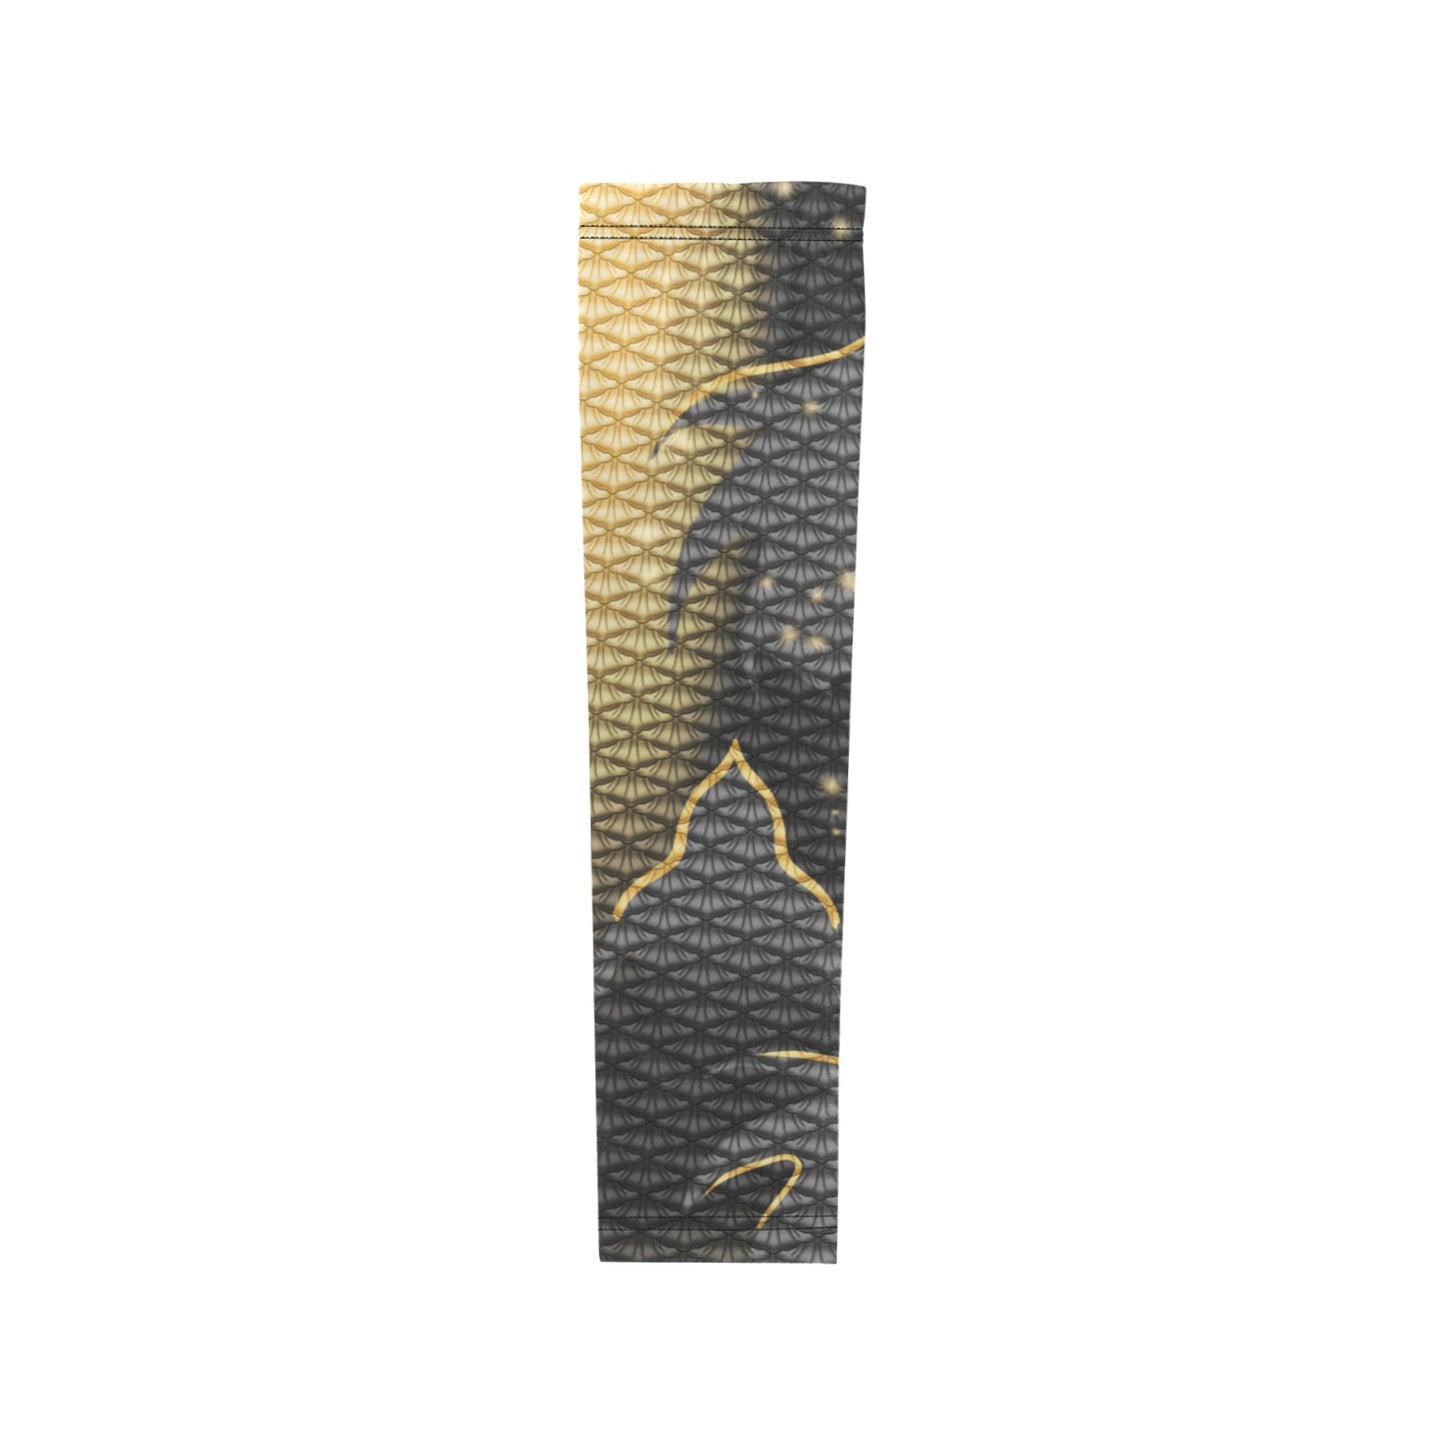 Ascension Arm Sleeves